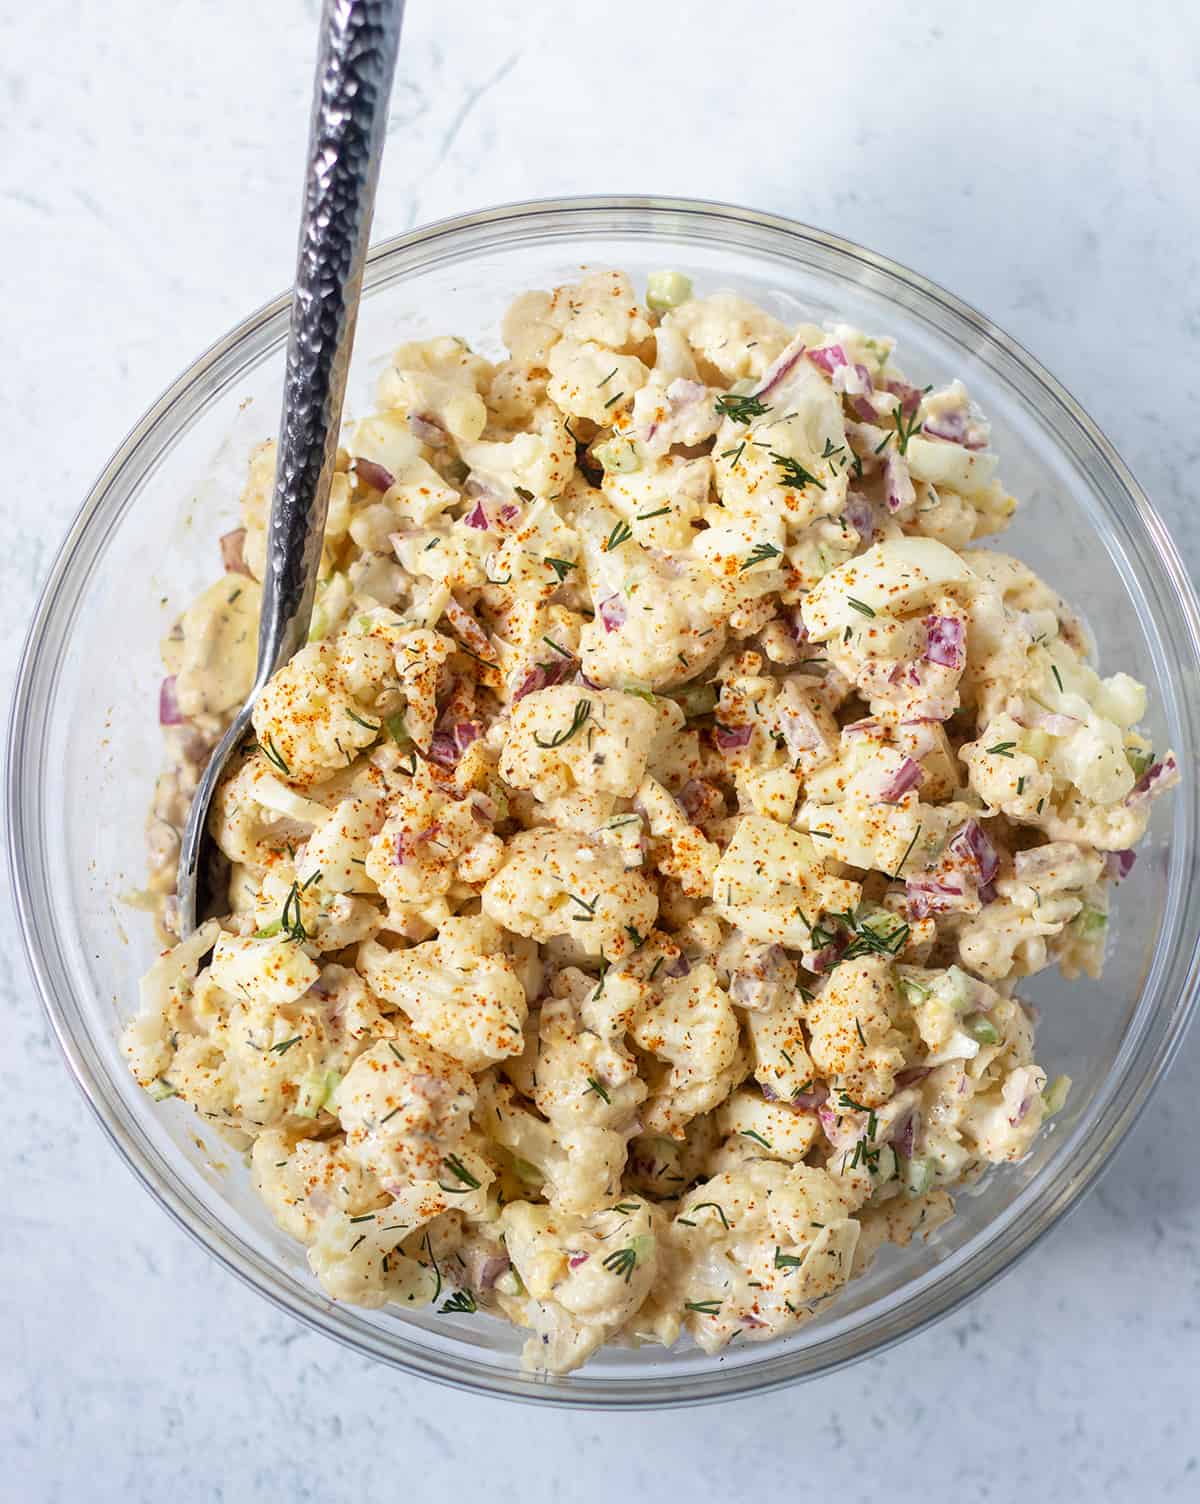 cauliflower potato salad in a clear glass bowl topped with fresh dill. A silver spoon in the bowl for serving.